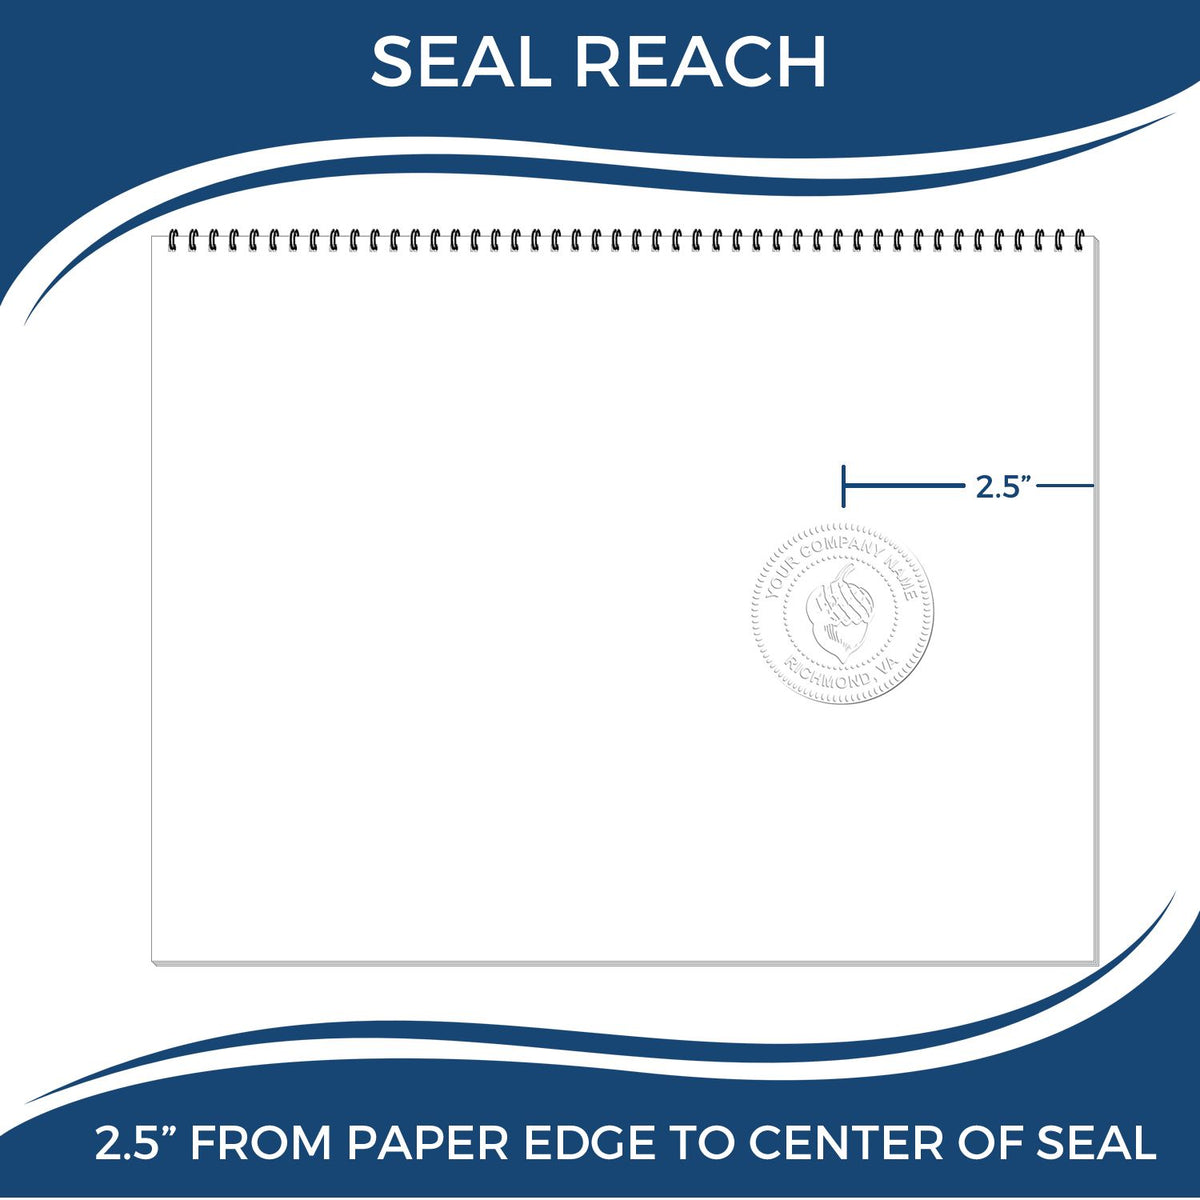 An infographic showing the seal reach which is represented by a ruler and a miniature seal image of the Long Reach Alaska Land Surveyor Seal